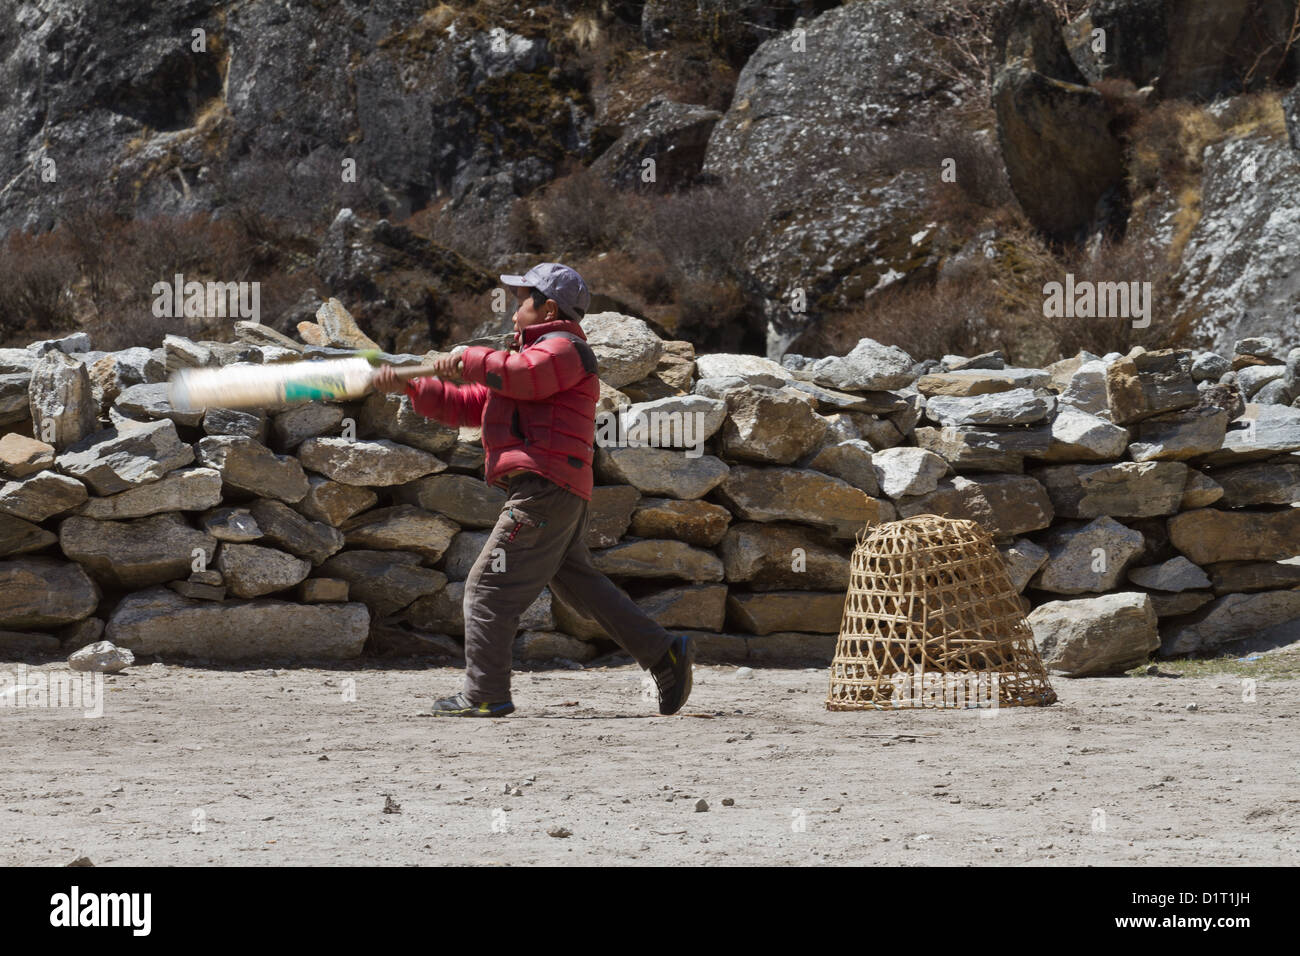 A young boy playing cricket with a improvised wicket in a Nepalese village,in the Khumbu Valley Nepal, Asia Stock Photo